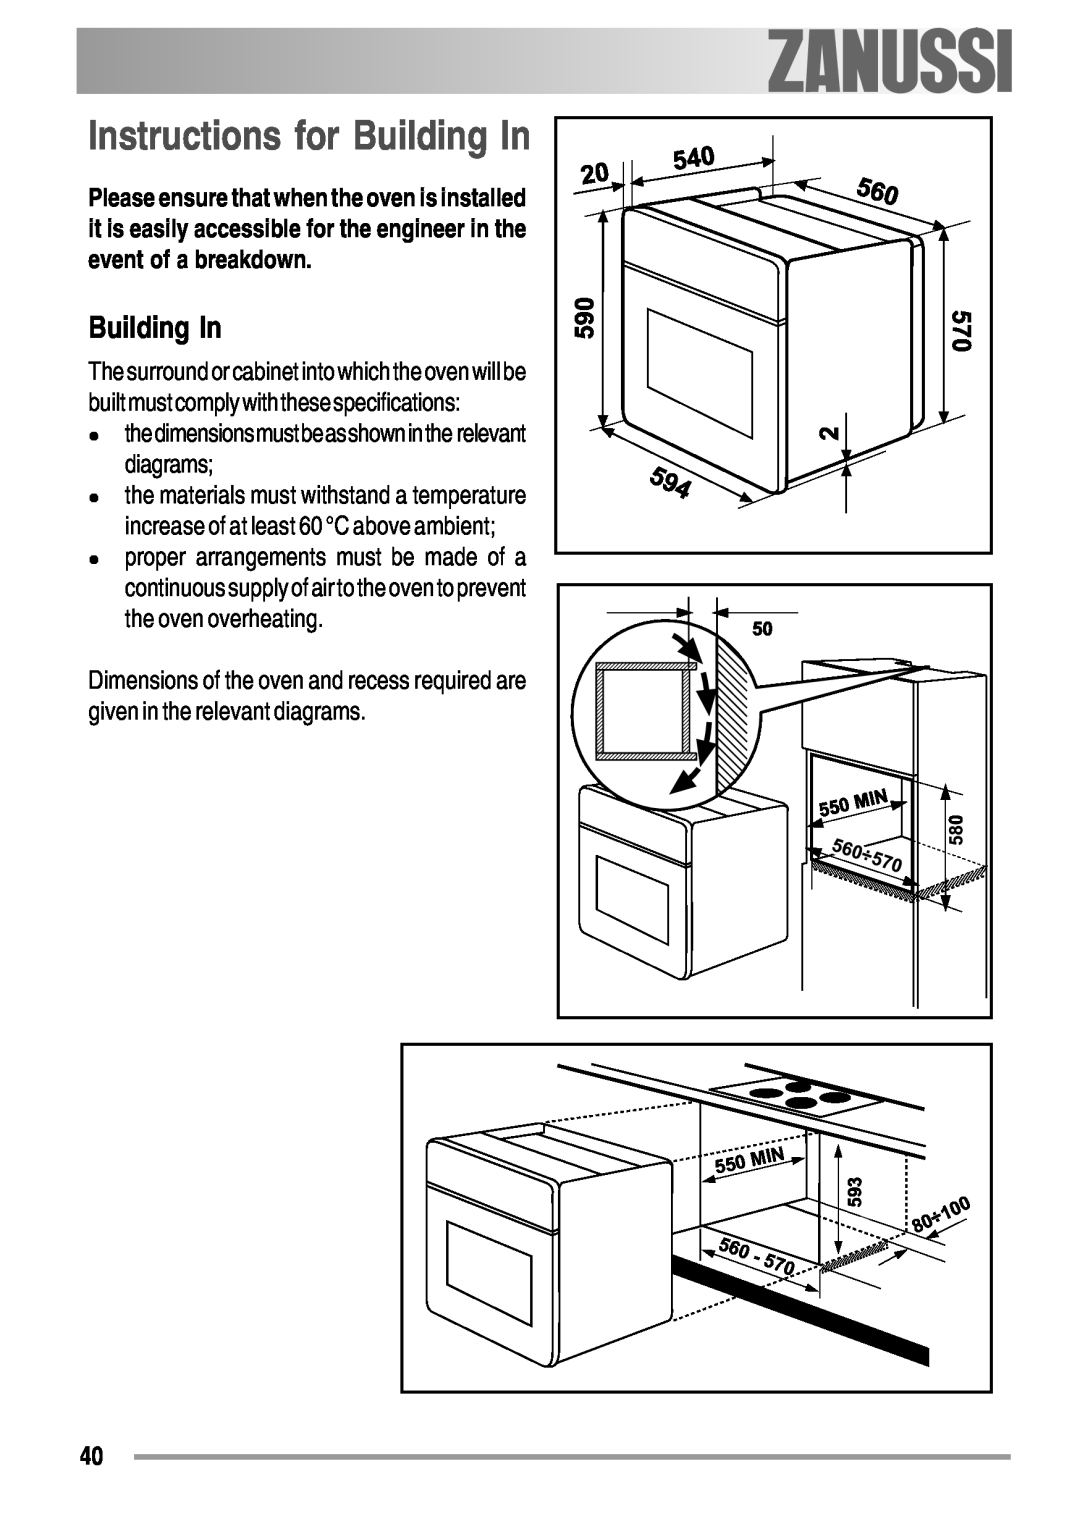 Zanussi ZYB 594 manual Instructions for Building In, electrolux, thedimensionsmustbeasshowninthe relevant diagrams 